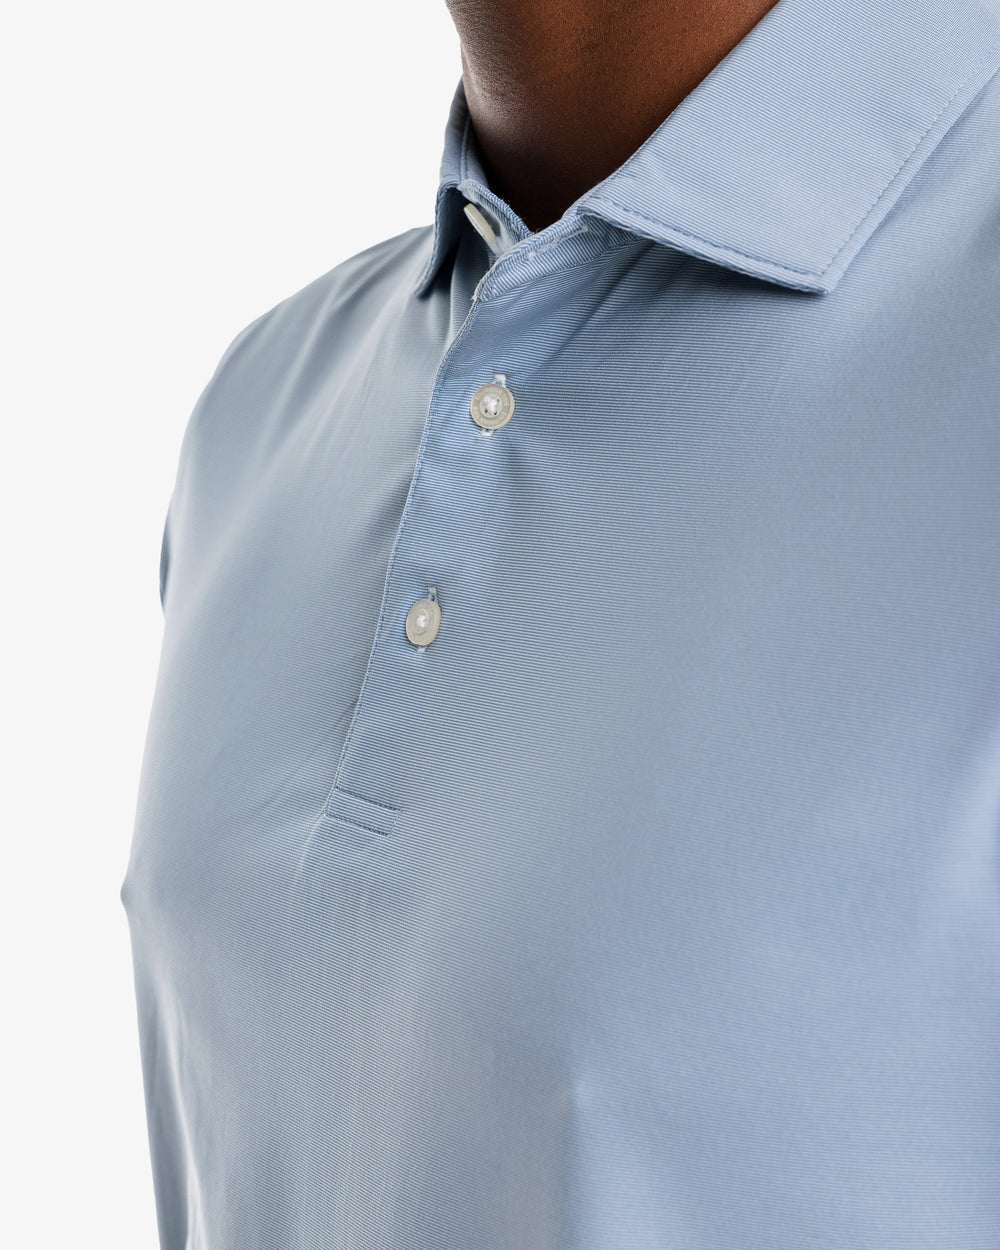 The model detail view of the Men's Sawgrass Stripe brrr°®-eeze Performance Polo Shirt by Southern Tide - Blue Ridge